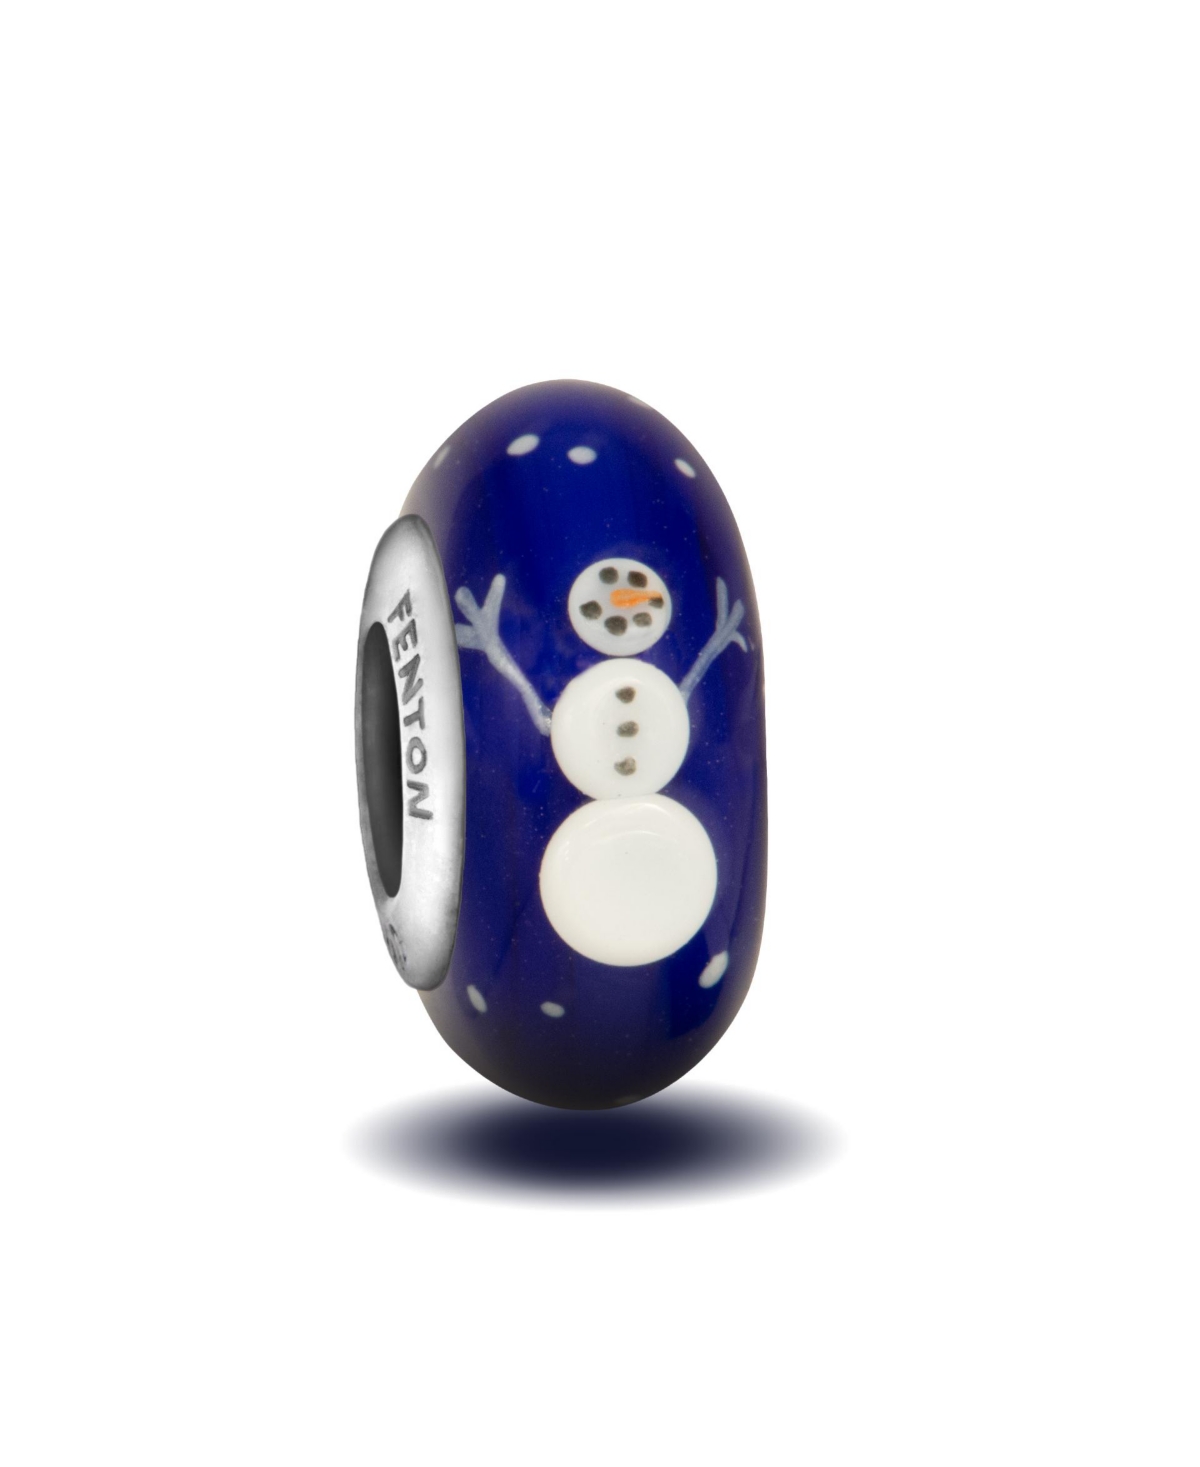 Frosty the Snowman Glass painted bead Charm - Royal blue/white